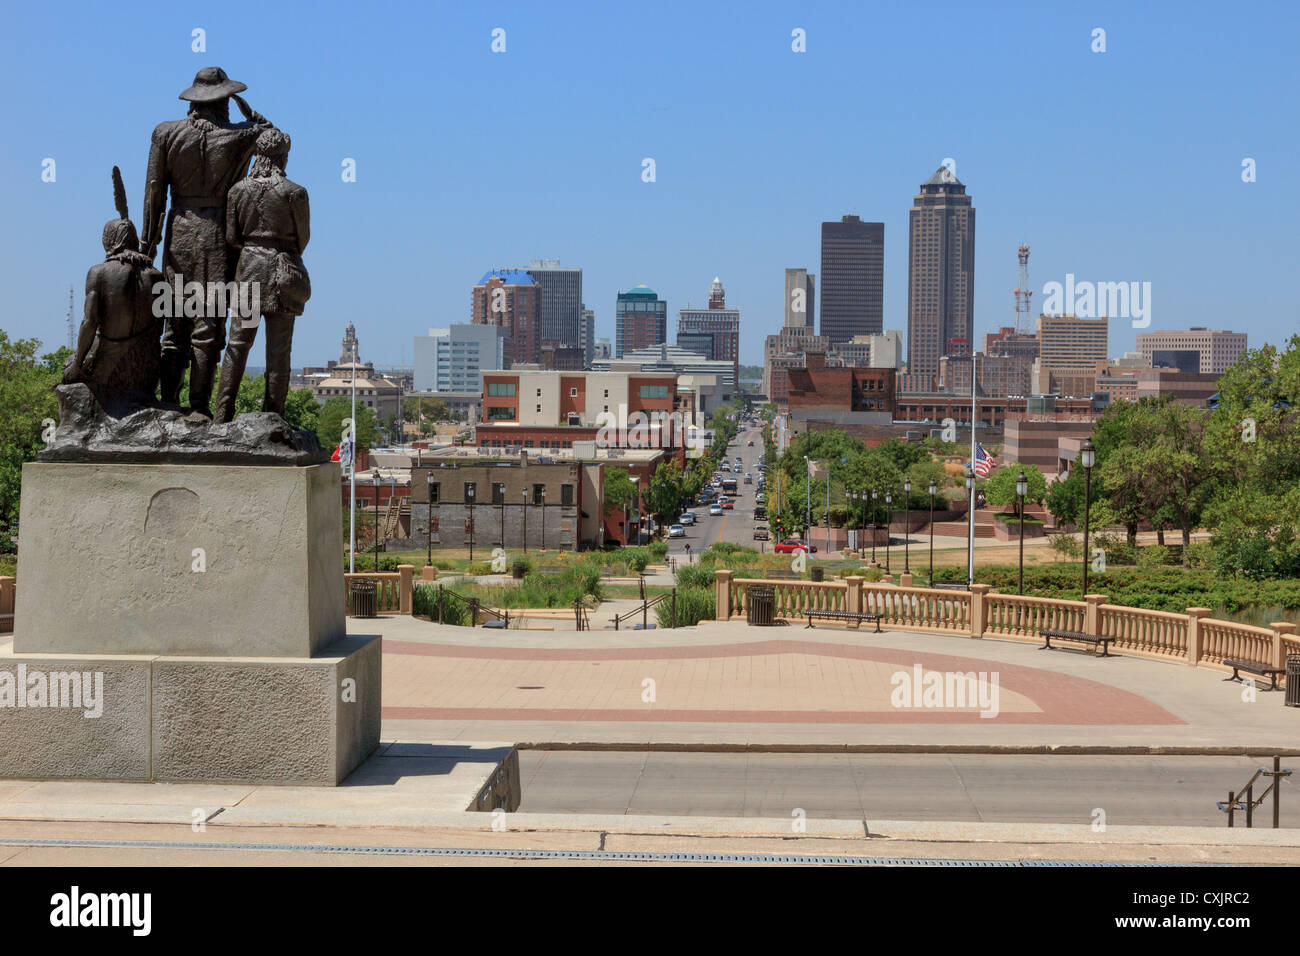 Pioneers of the Territory statue overlooking downtown Des Moines skyline in Iowa Stock Photo